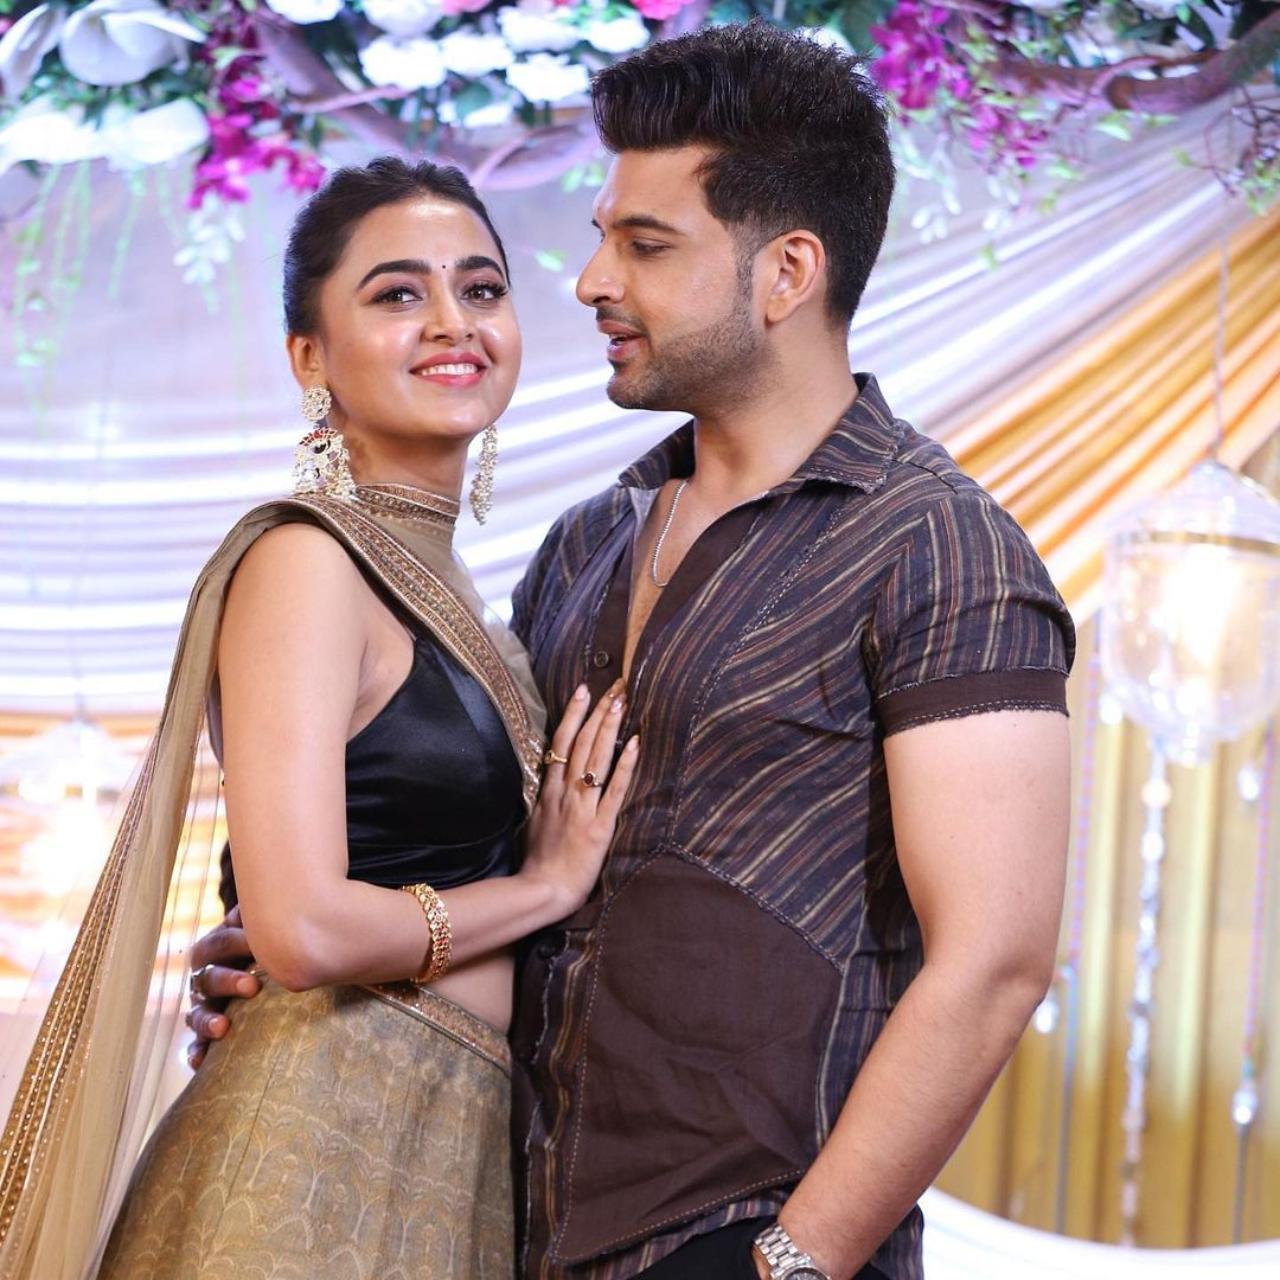 Karan and Tejasswi's relationship started after the former confessed on Bigg Boss 15 that he has a crush on the latter. Witha  little help from singer and co-contestanst Akasa, they started dating